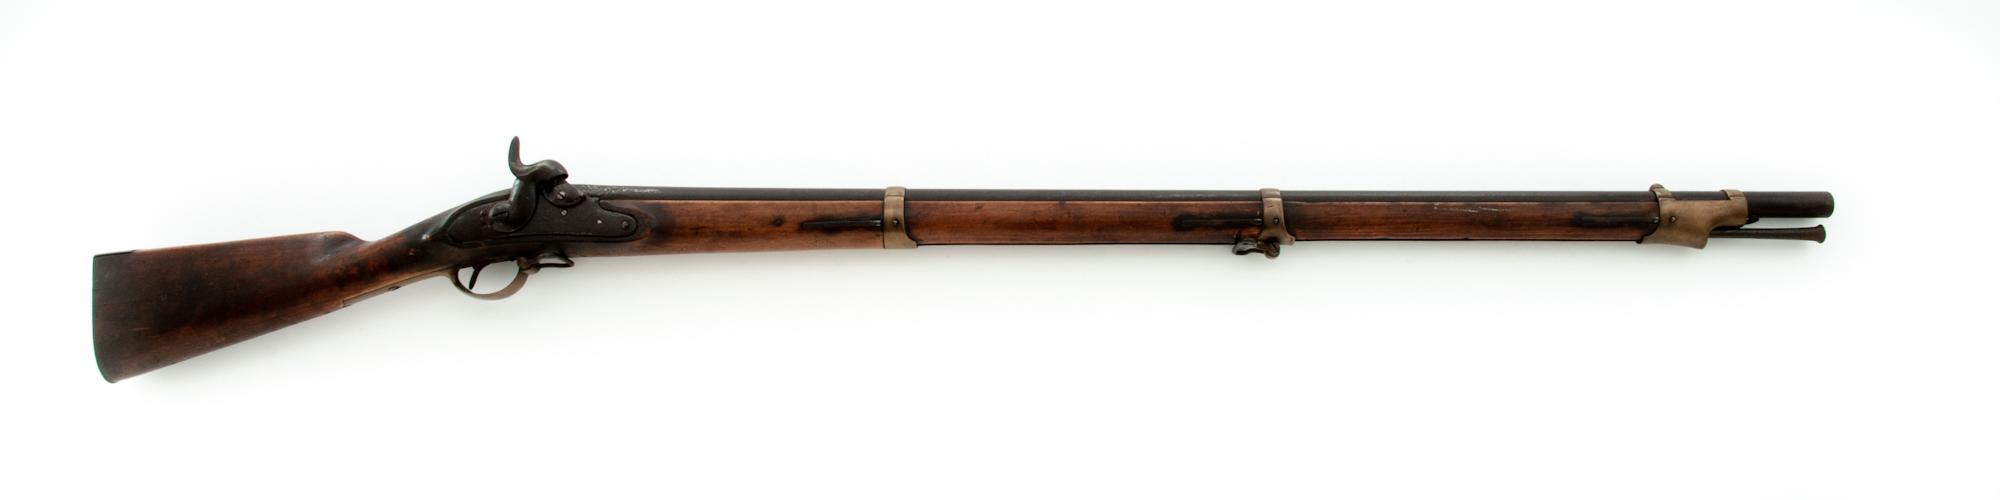 3-Band Fullstock Percussion Infantry Musket